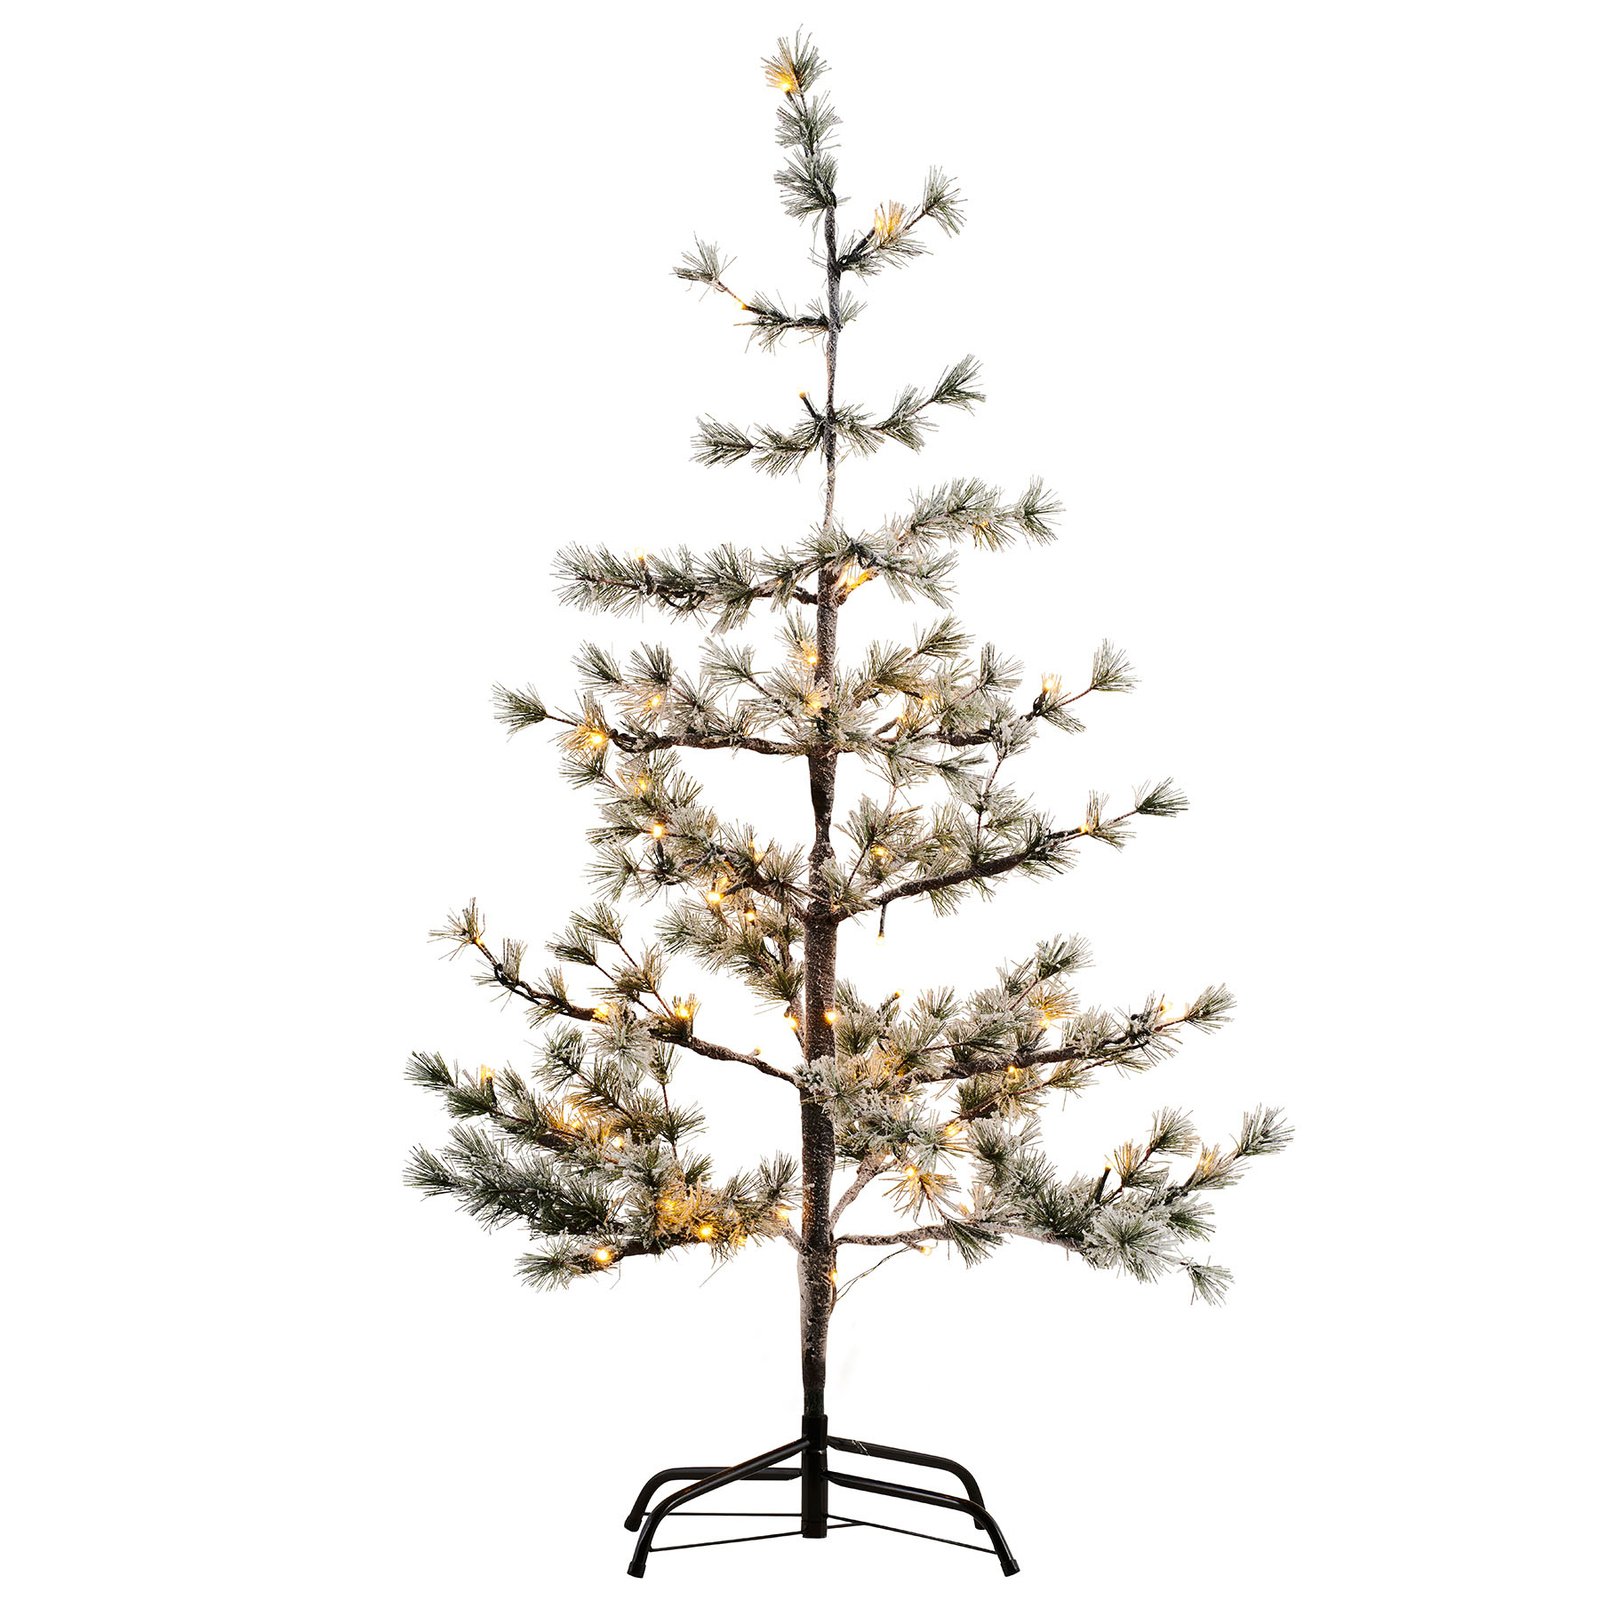 LED tree Alfi for indoor use, height 120 cm